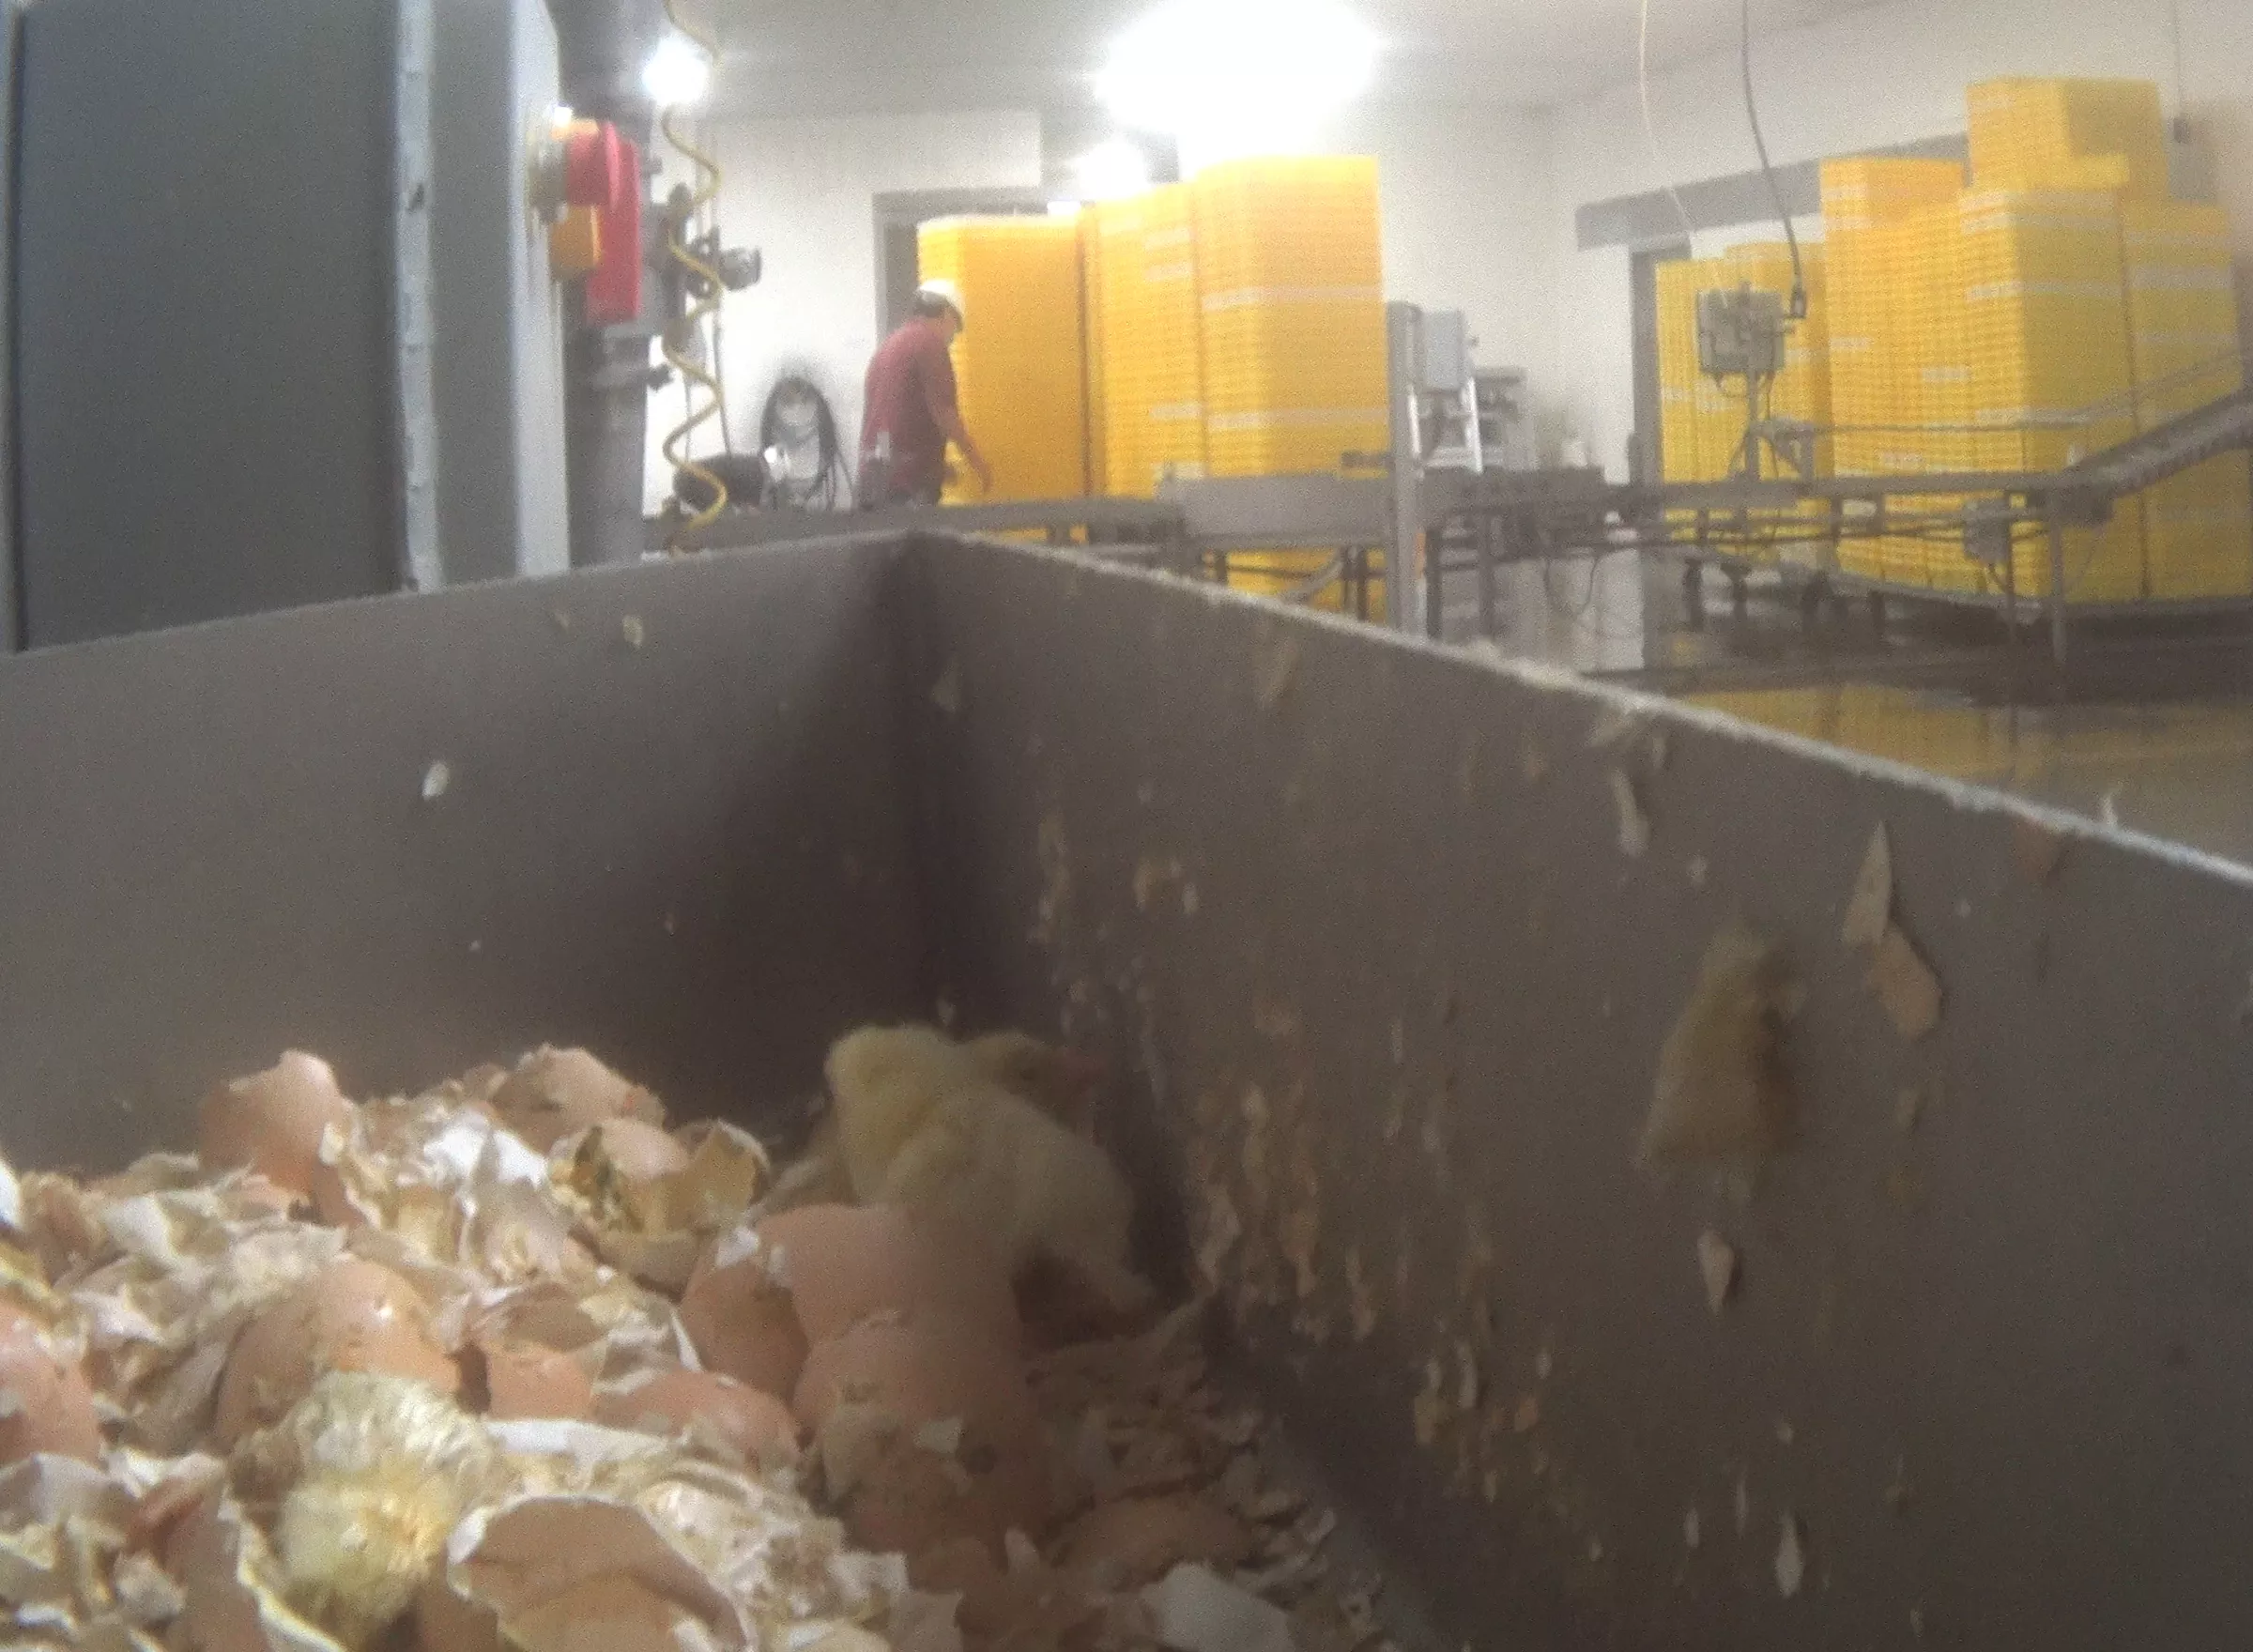 Live chicks dumped into a grinding chute and suffocated.